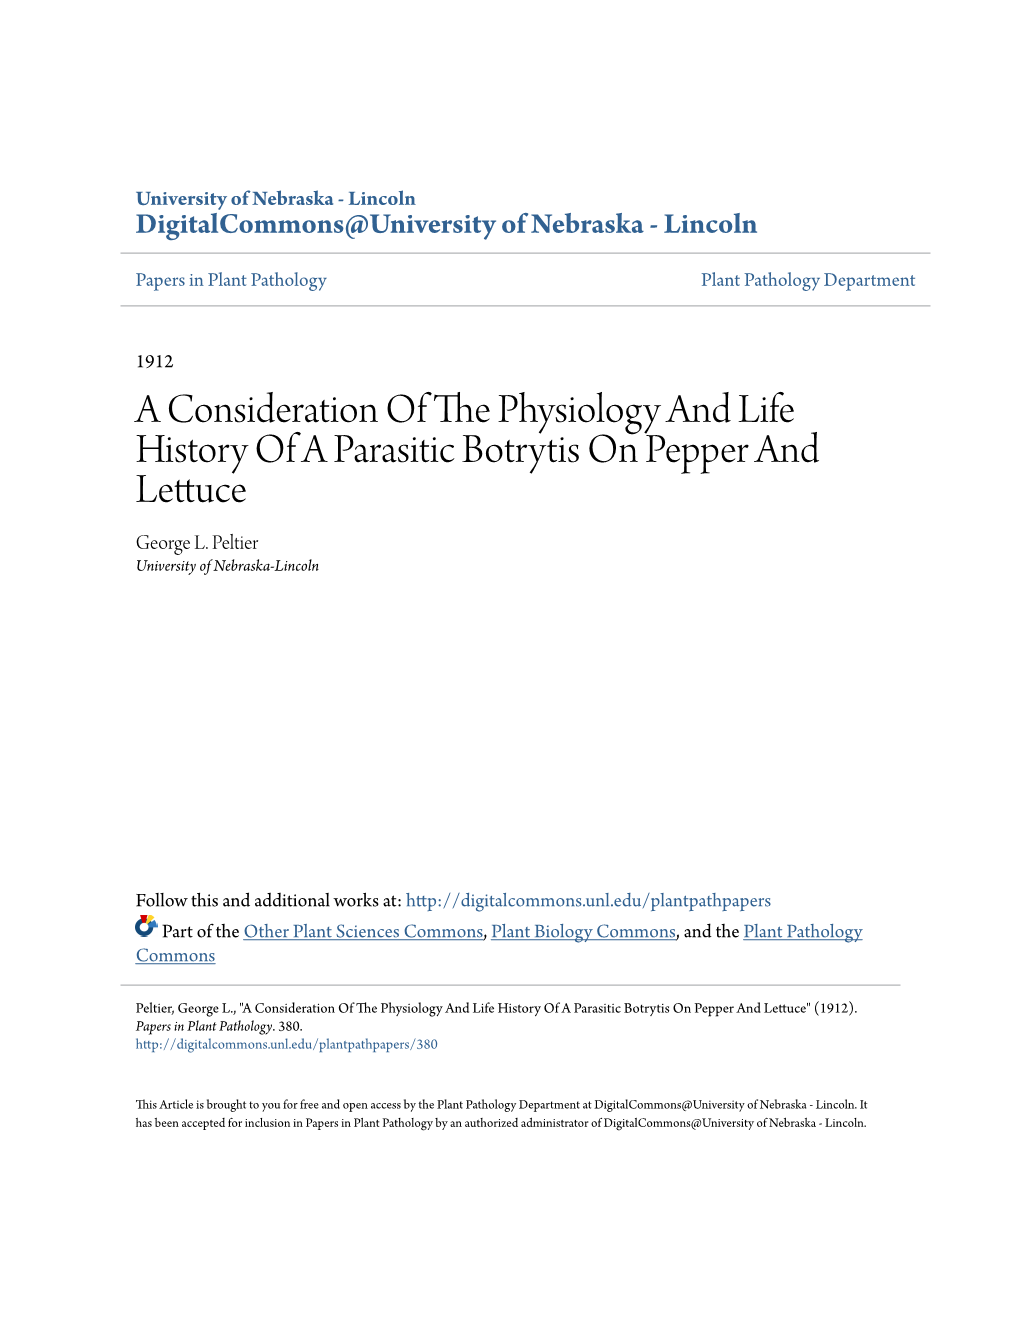 A Consideration of the Physiology and Life History of a Parasitic Botrytis on Pepper and Lettuce.'